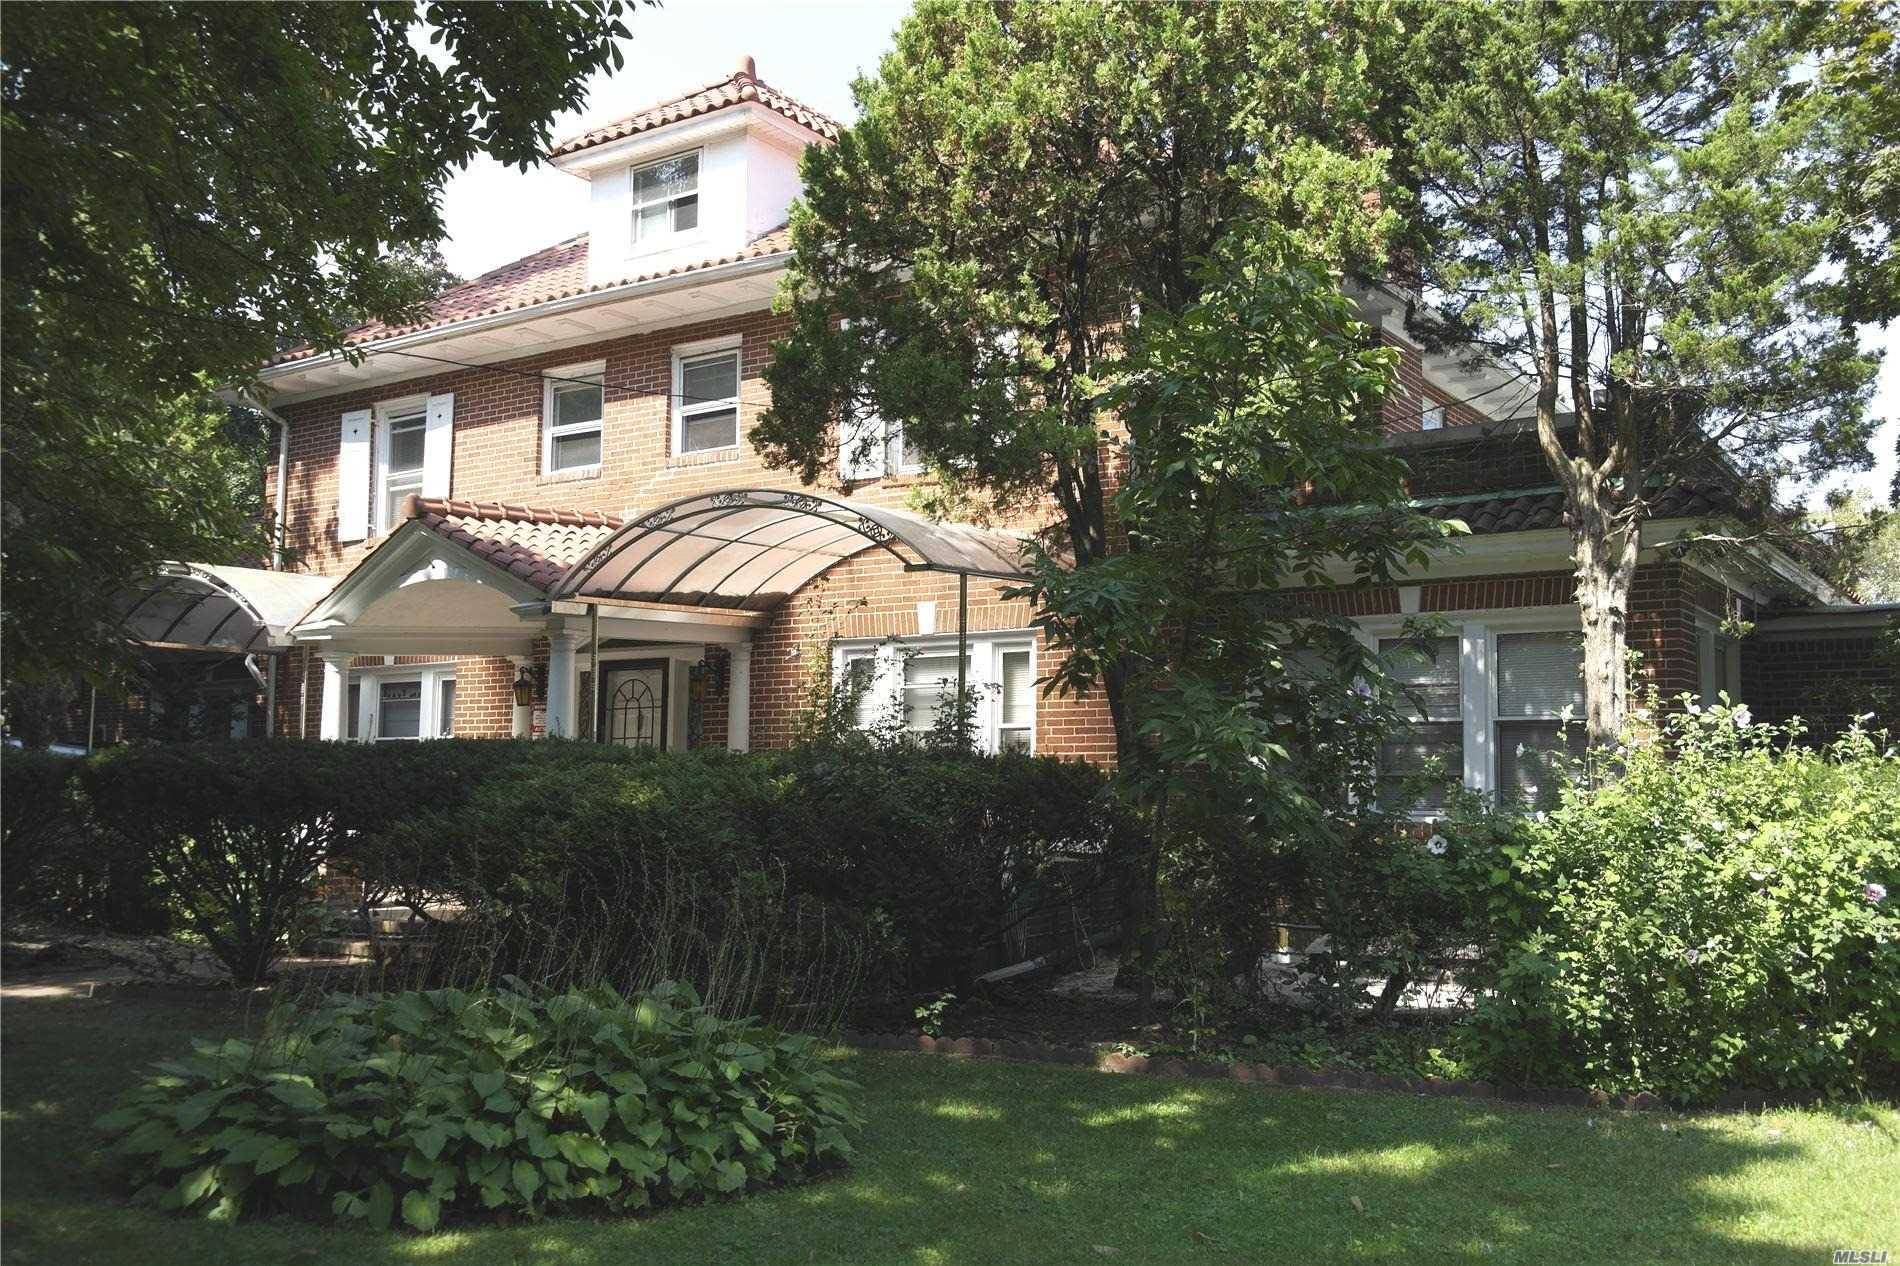 Corner Property, Extra Large Colonial In The Best Location Of Flushing, Facing The Magnificent Kissena Park With Lake, Close To All Shops And Transportation.